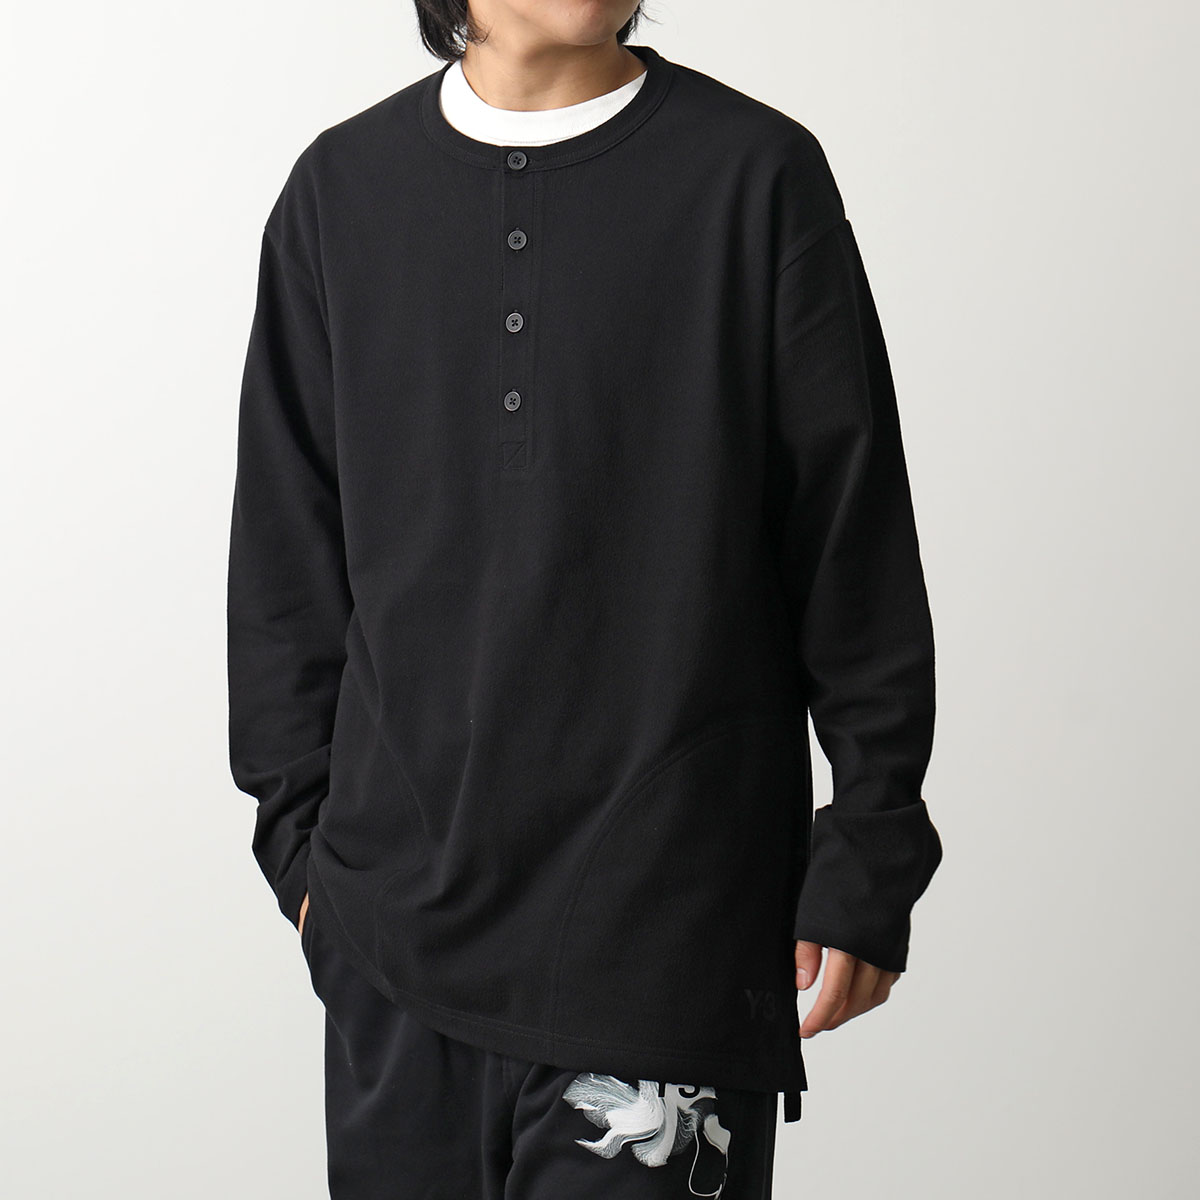 Y-3 ワイスリー 長袖 Tシャツ WRKWR SS TEE IN8700 メンズ ロンT コットン...